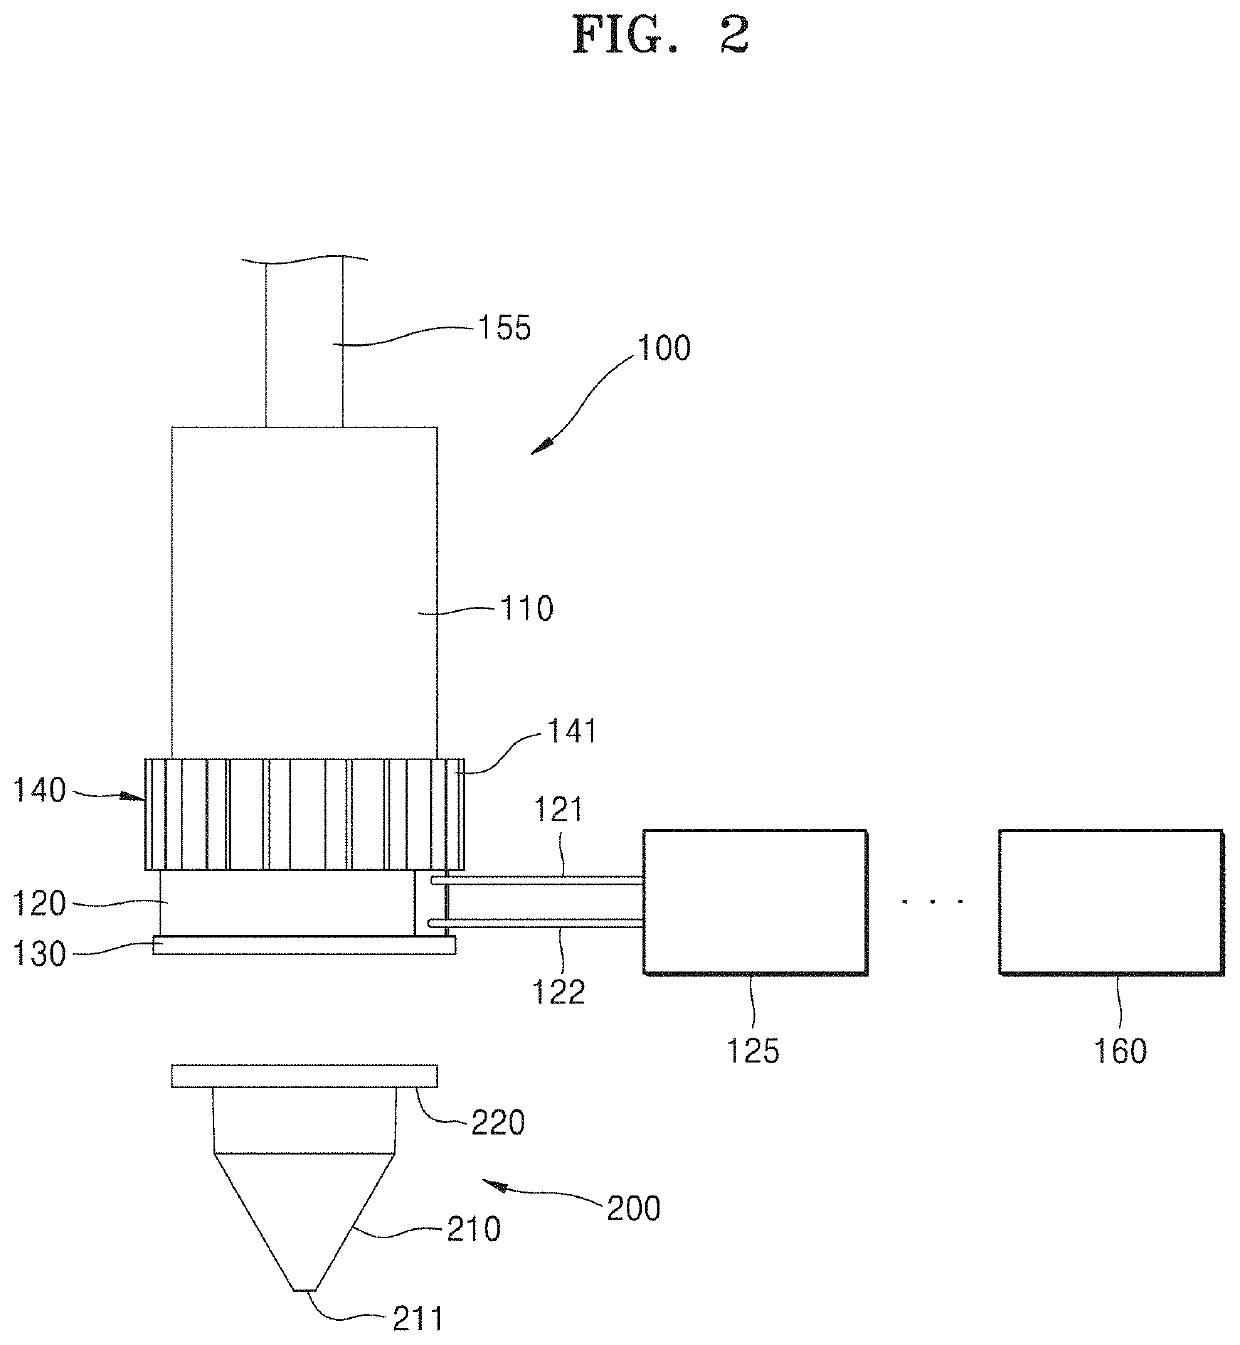 Apparatus and method for analyzing samples